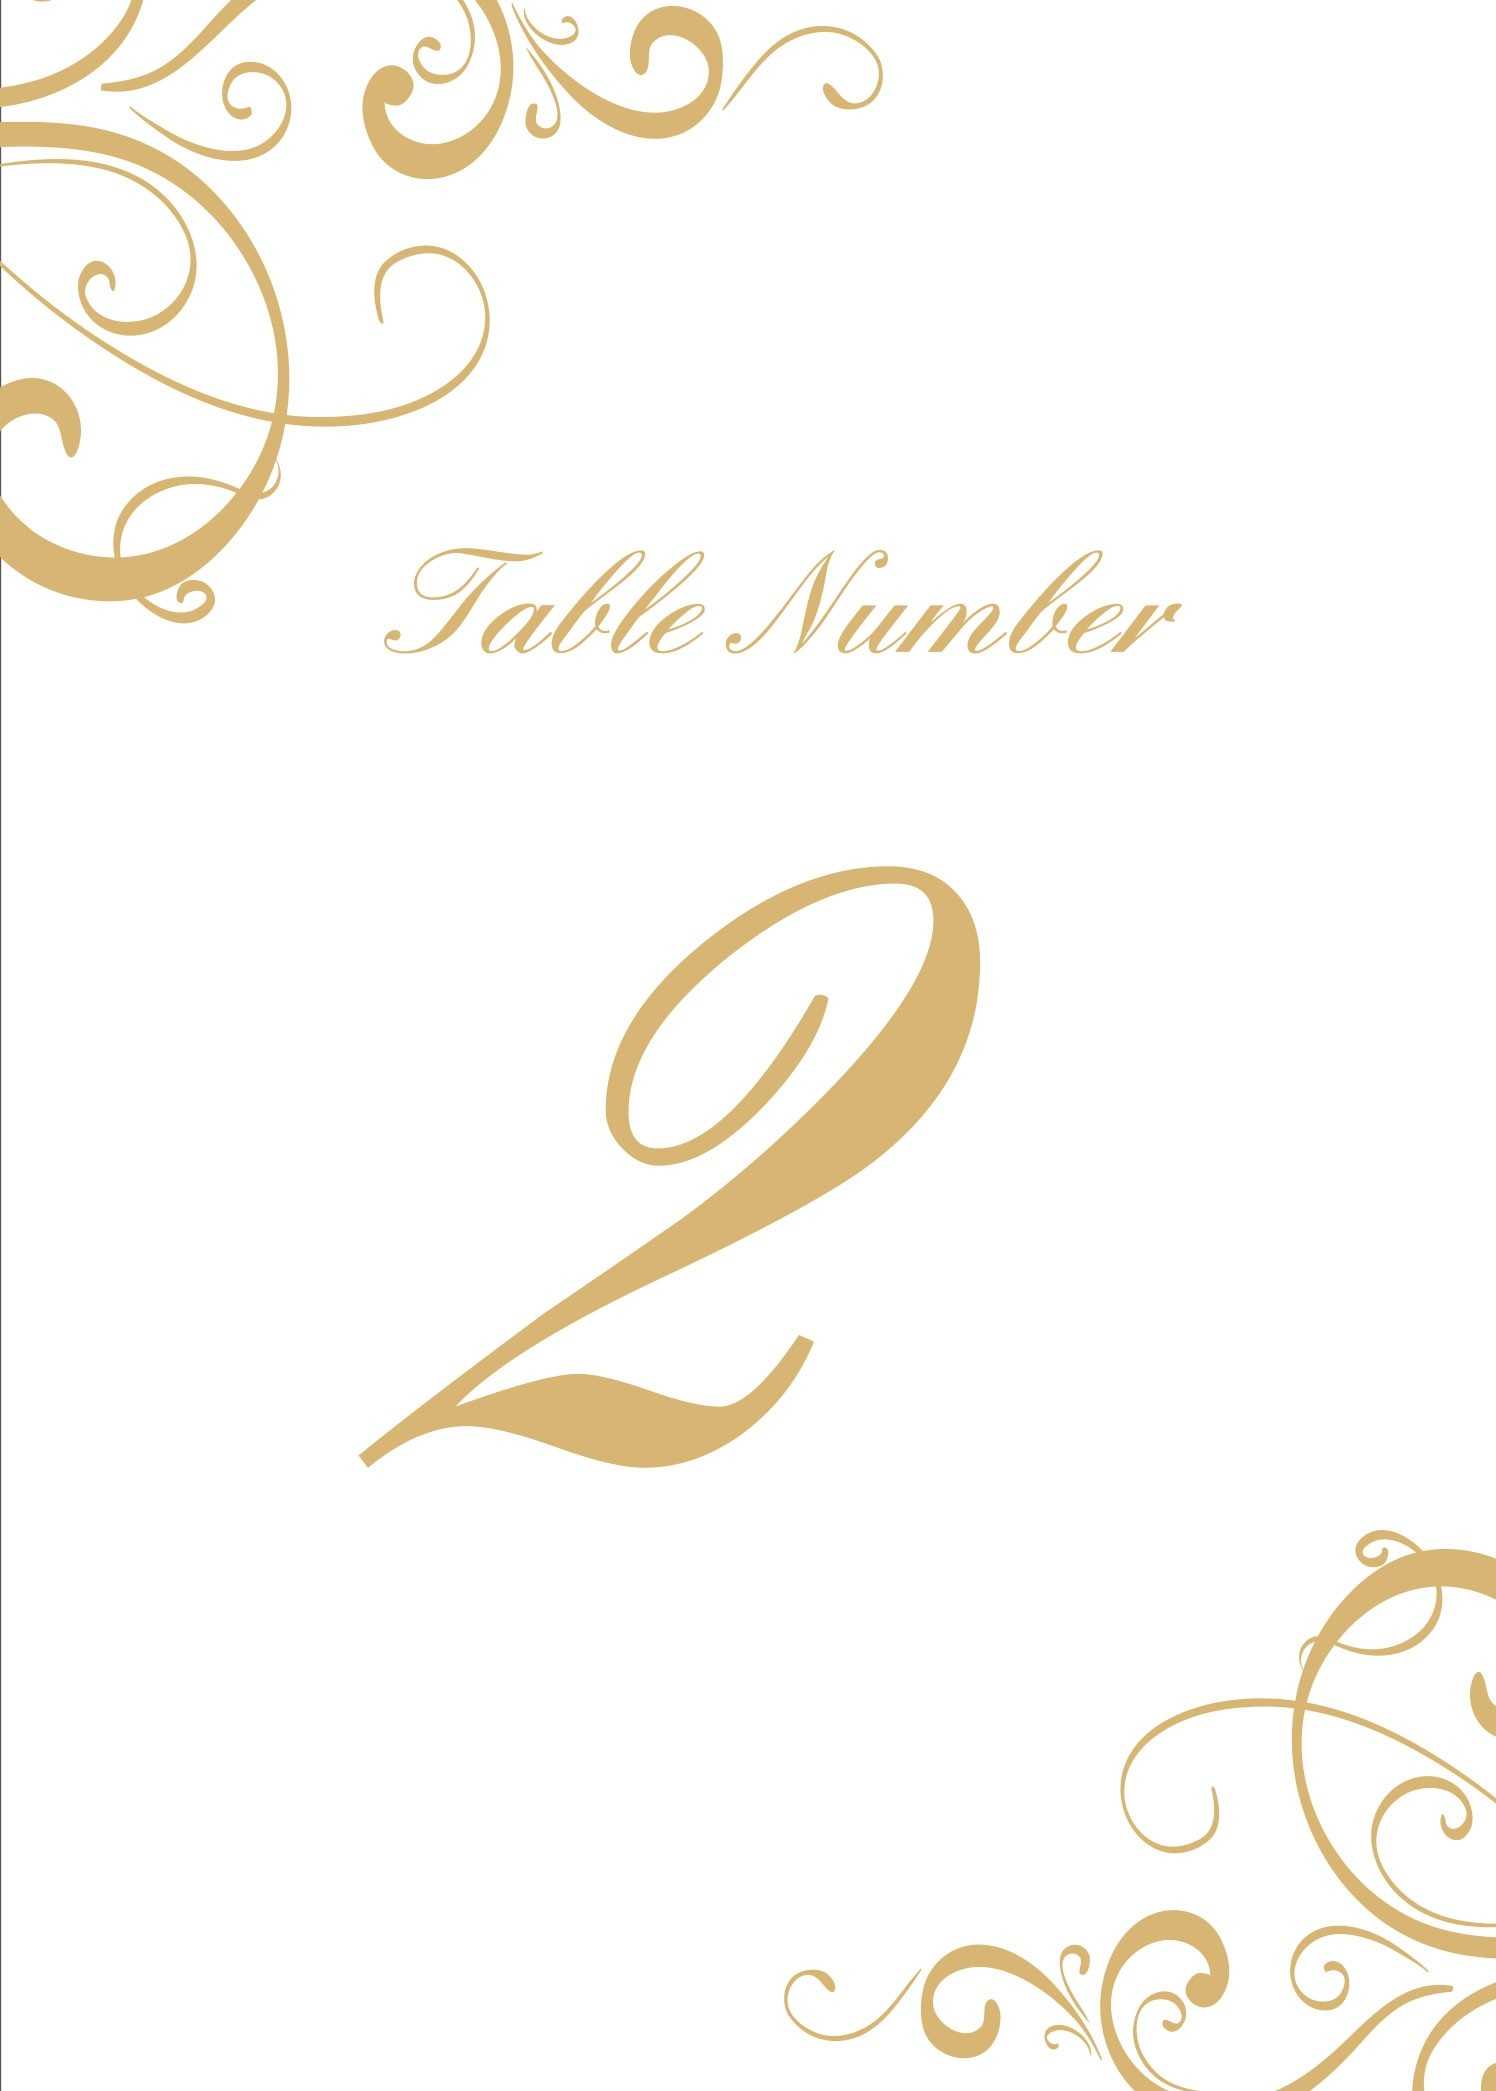 Wedding Table Numbers | Printable Pdfbasic Invite With Regard To Table Number Cards Template